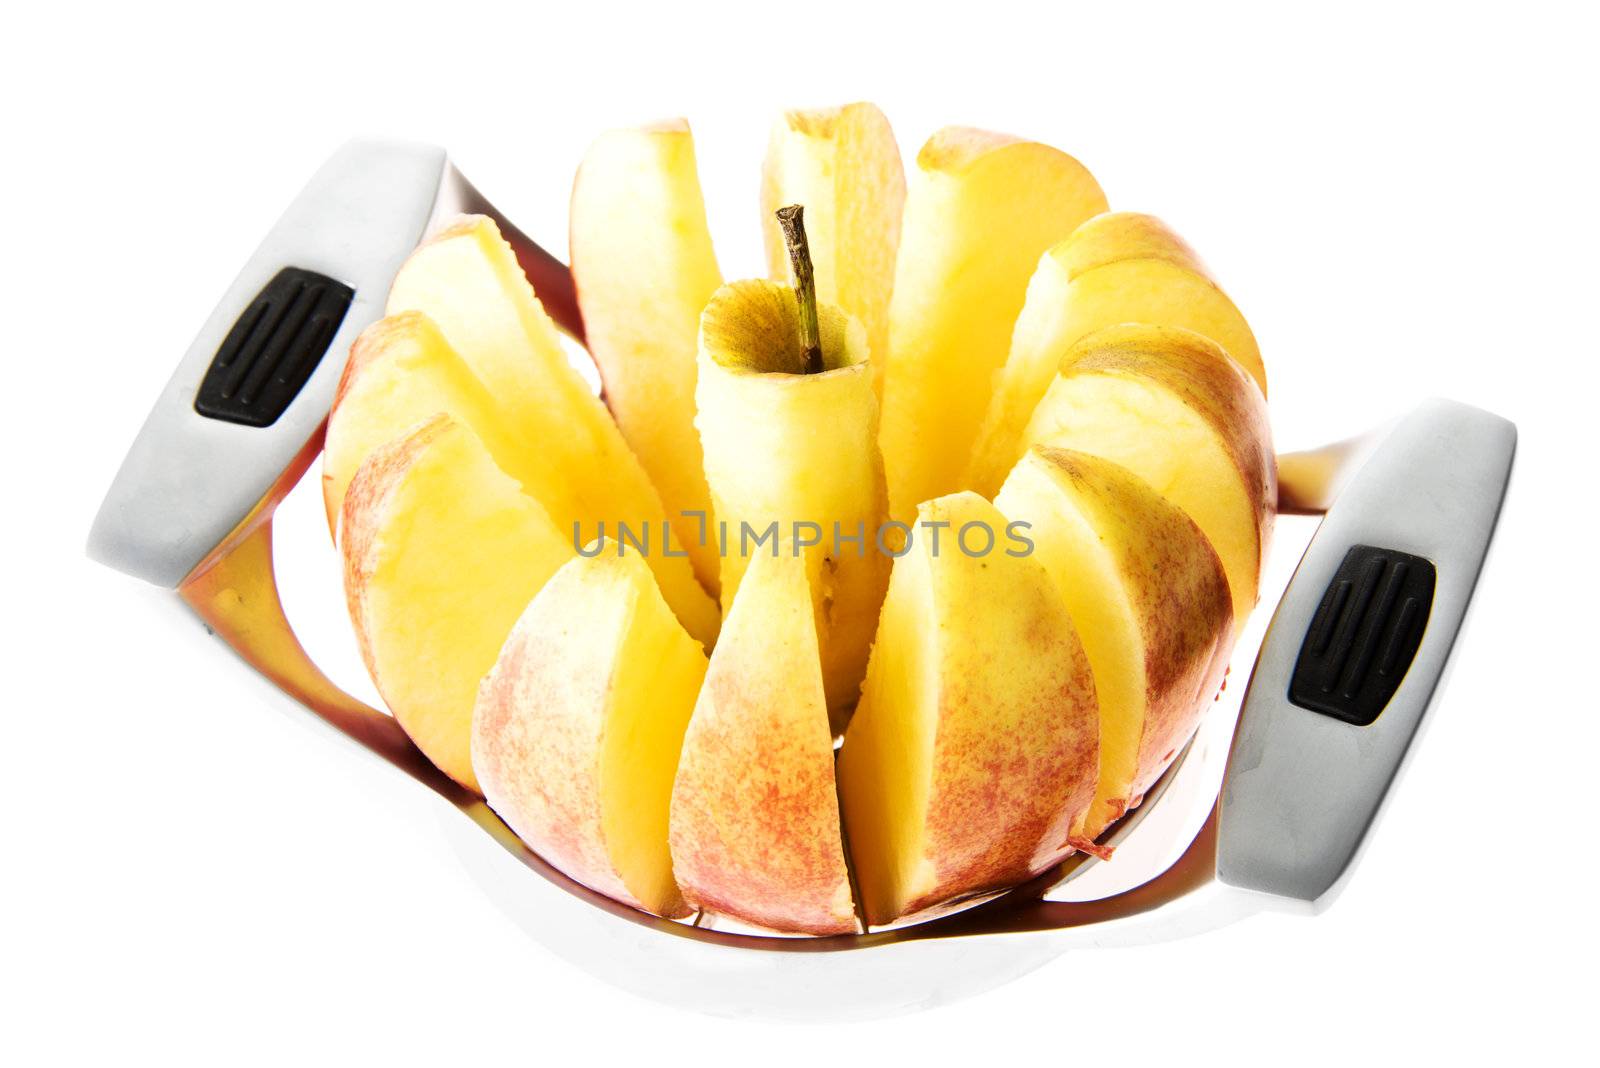 Fresh apple sliced with slicer by BDS